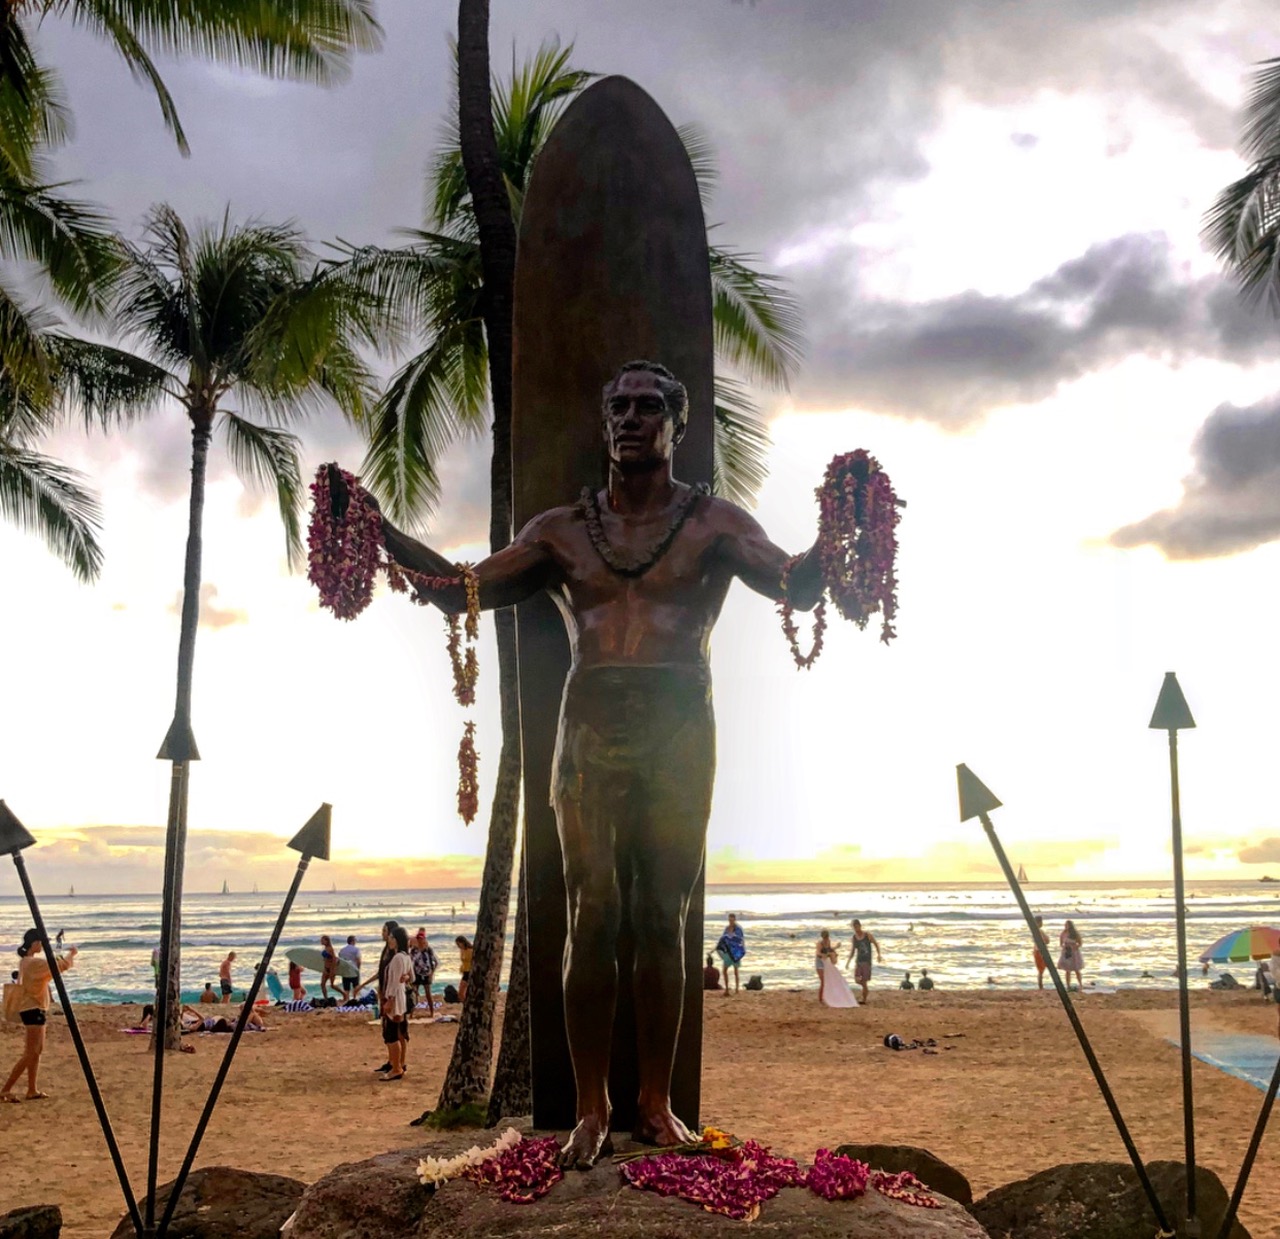 a statue of a man holding a surfboard and leis